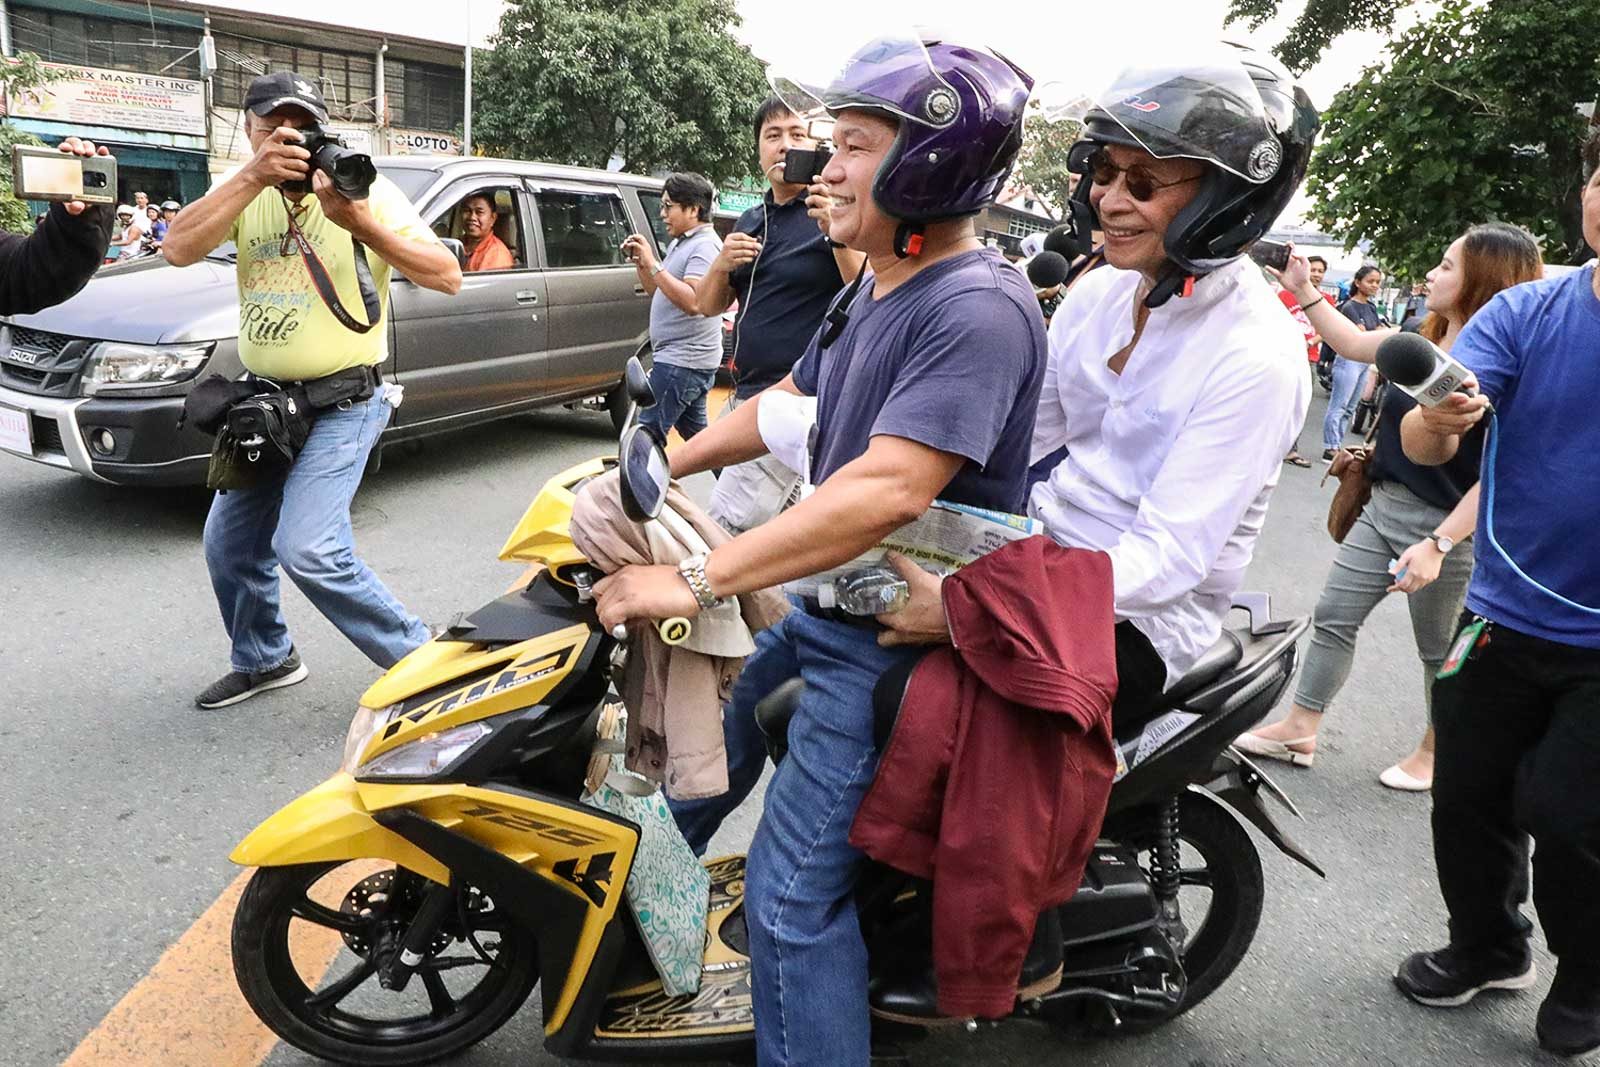 BIKE RIDE. Spokeperson Salvador Panelo gets on a motor bike ride for the last leg of his commute to Malacangg on October 11, 2019. Photo by Darren Langit/Rappler  